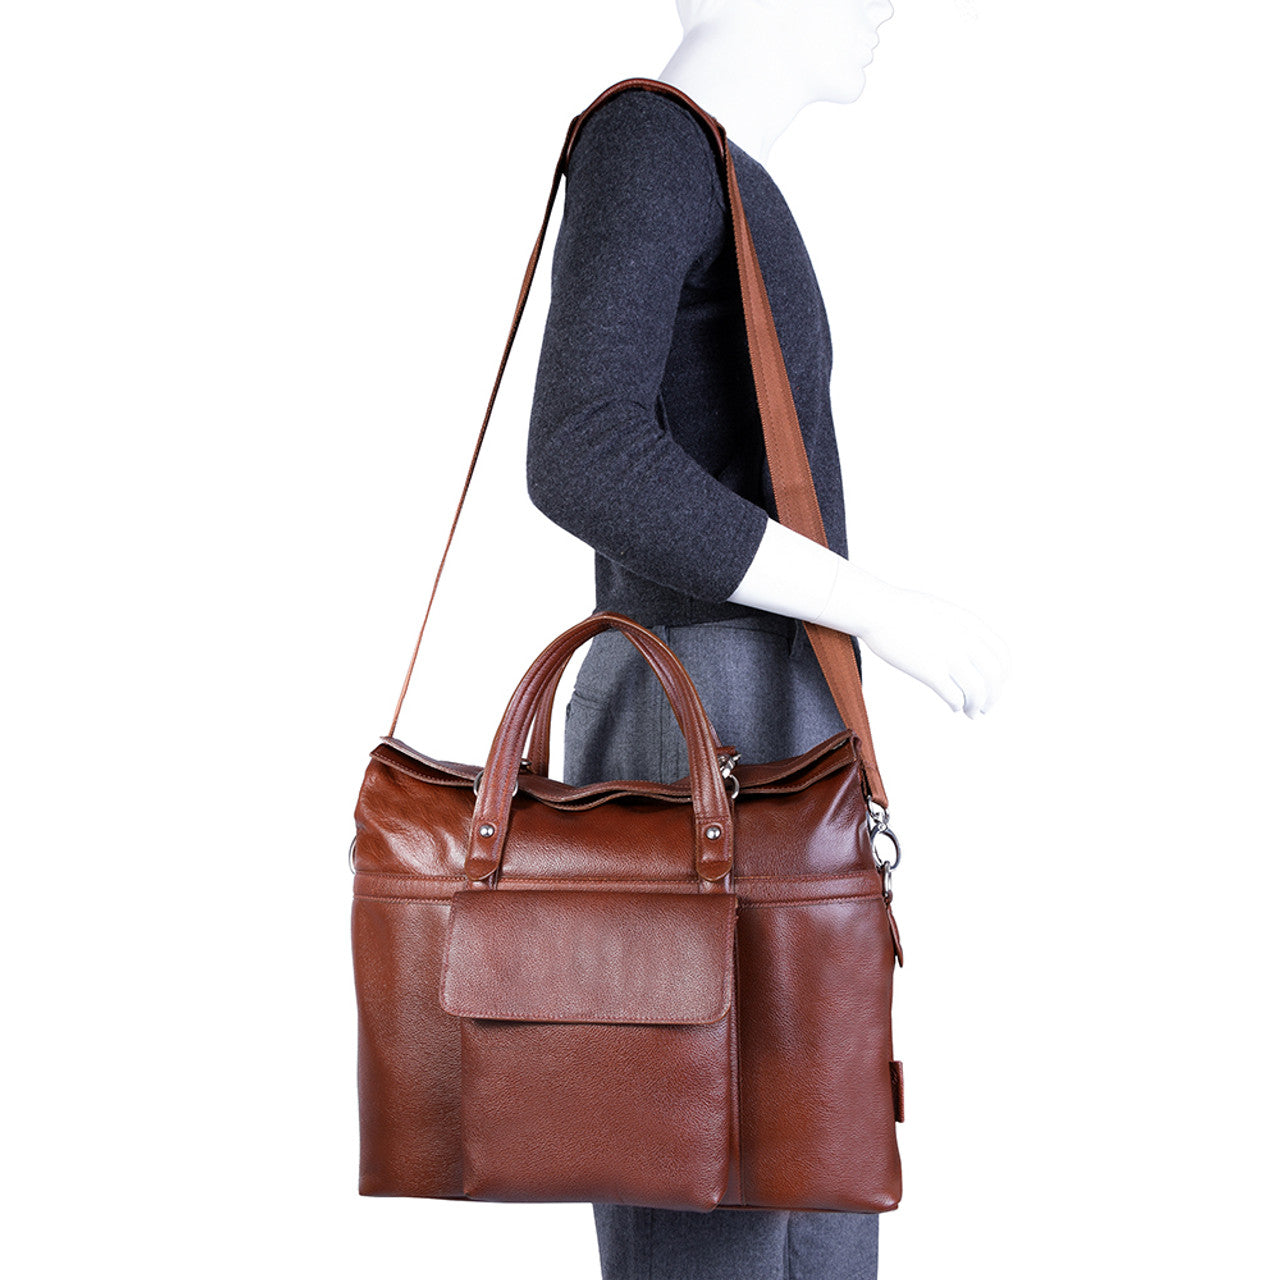 Edgefield Roll Top Laptop Briefcase - Leather Loom